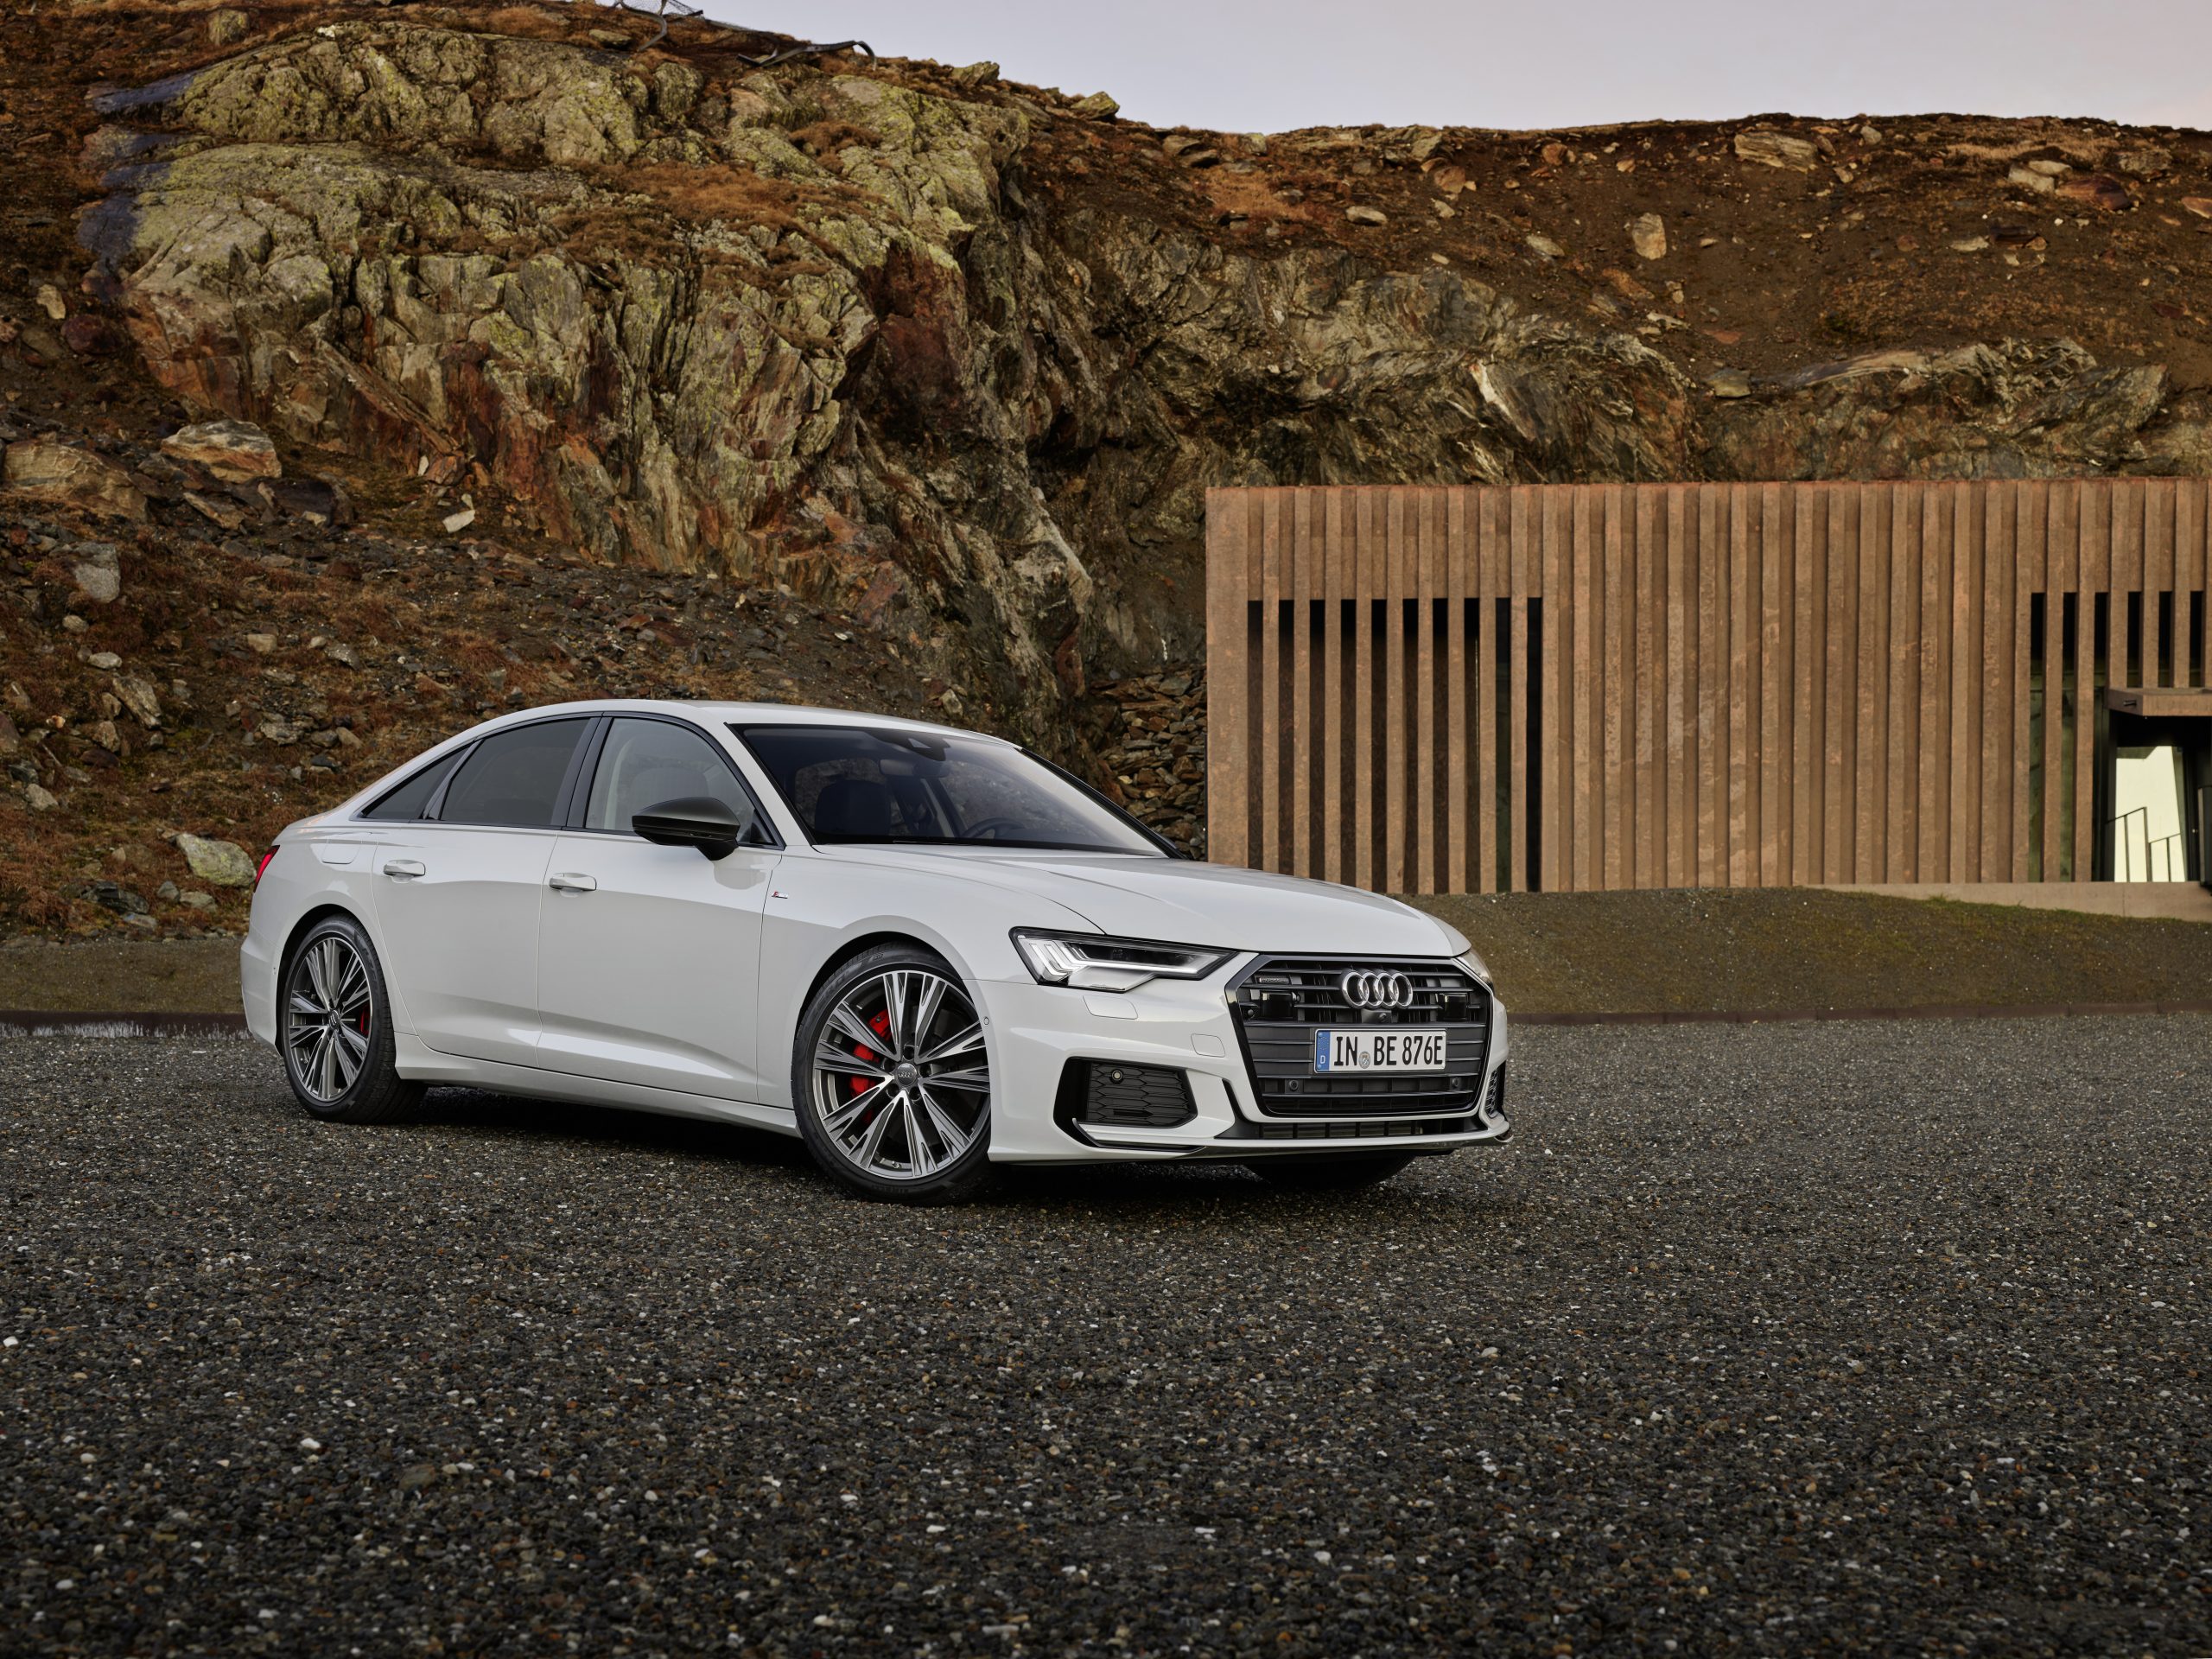 A 3/4 front view of a white 2022 Audi A6 sedan parked on gravel with rocky cliffs in the background.